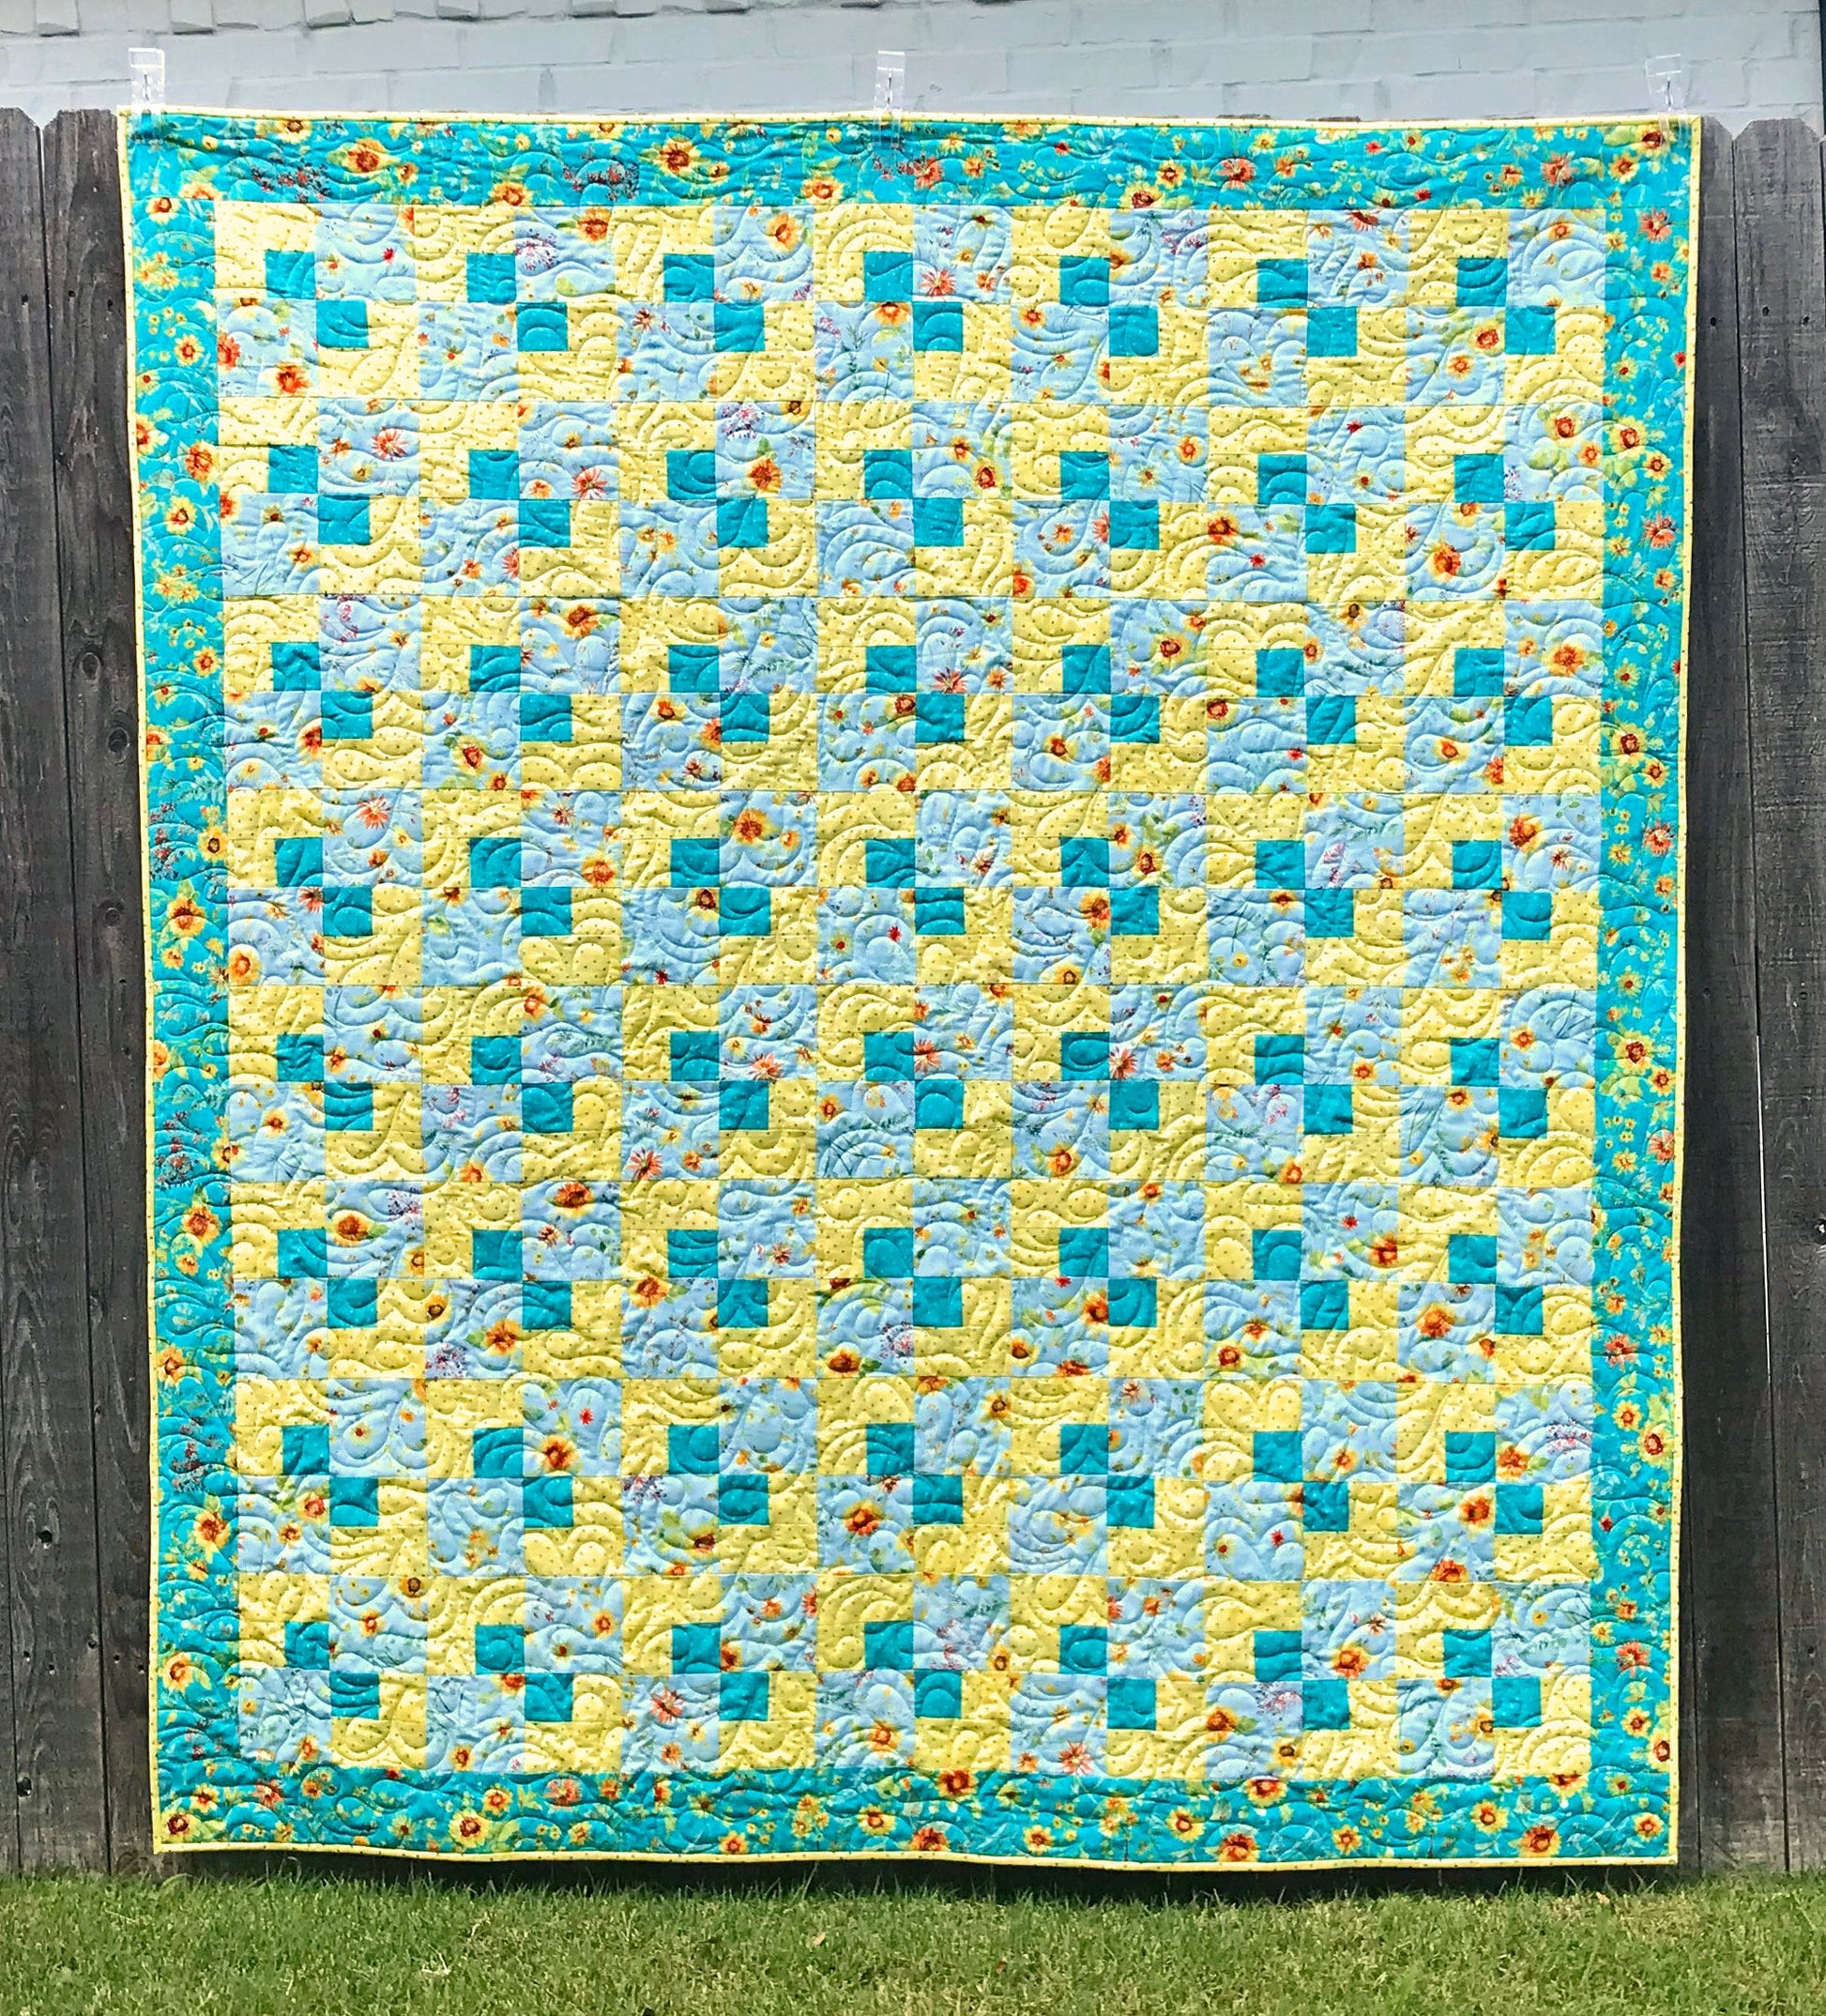 Cornerstones quilt pattern sample quilt. Four patch quilt in yellow and teal floral fabrics displayed on a fence.